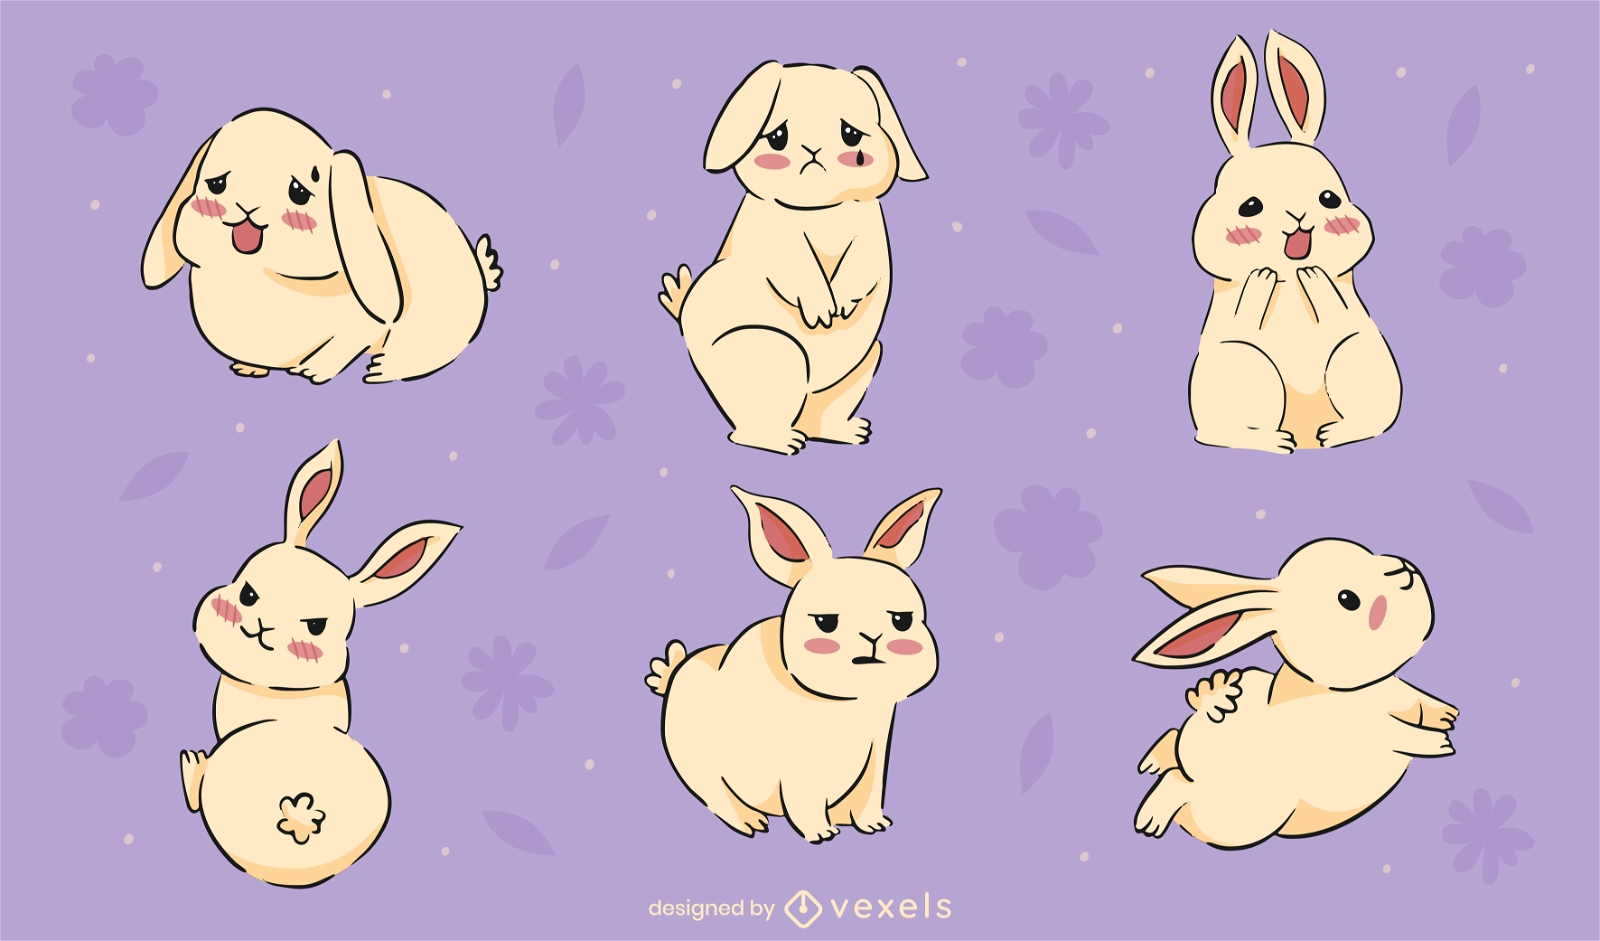 Cute bunny emotions characters set